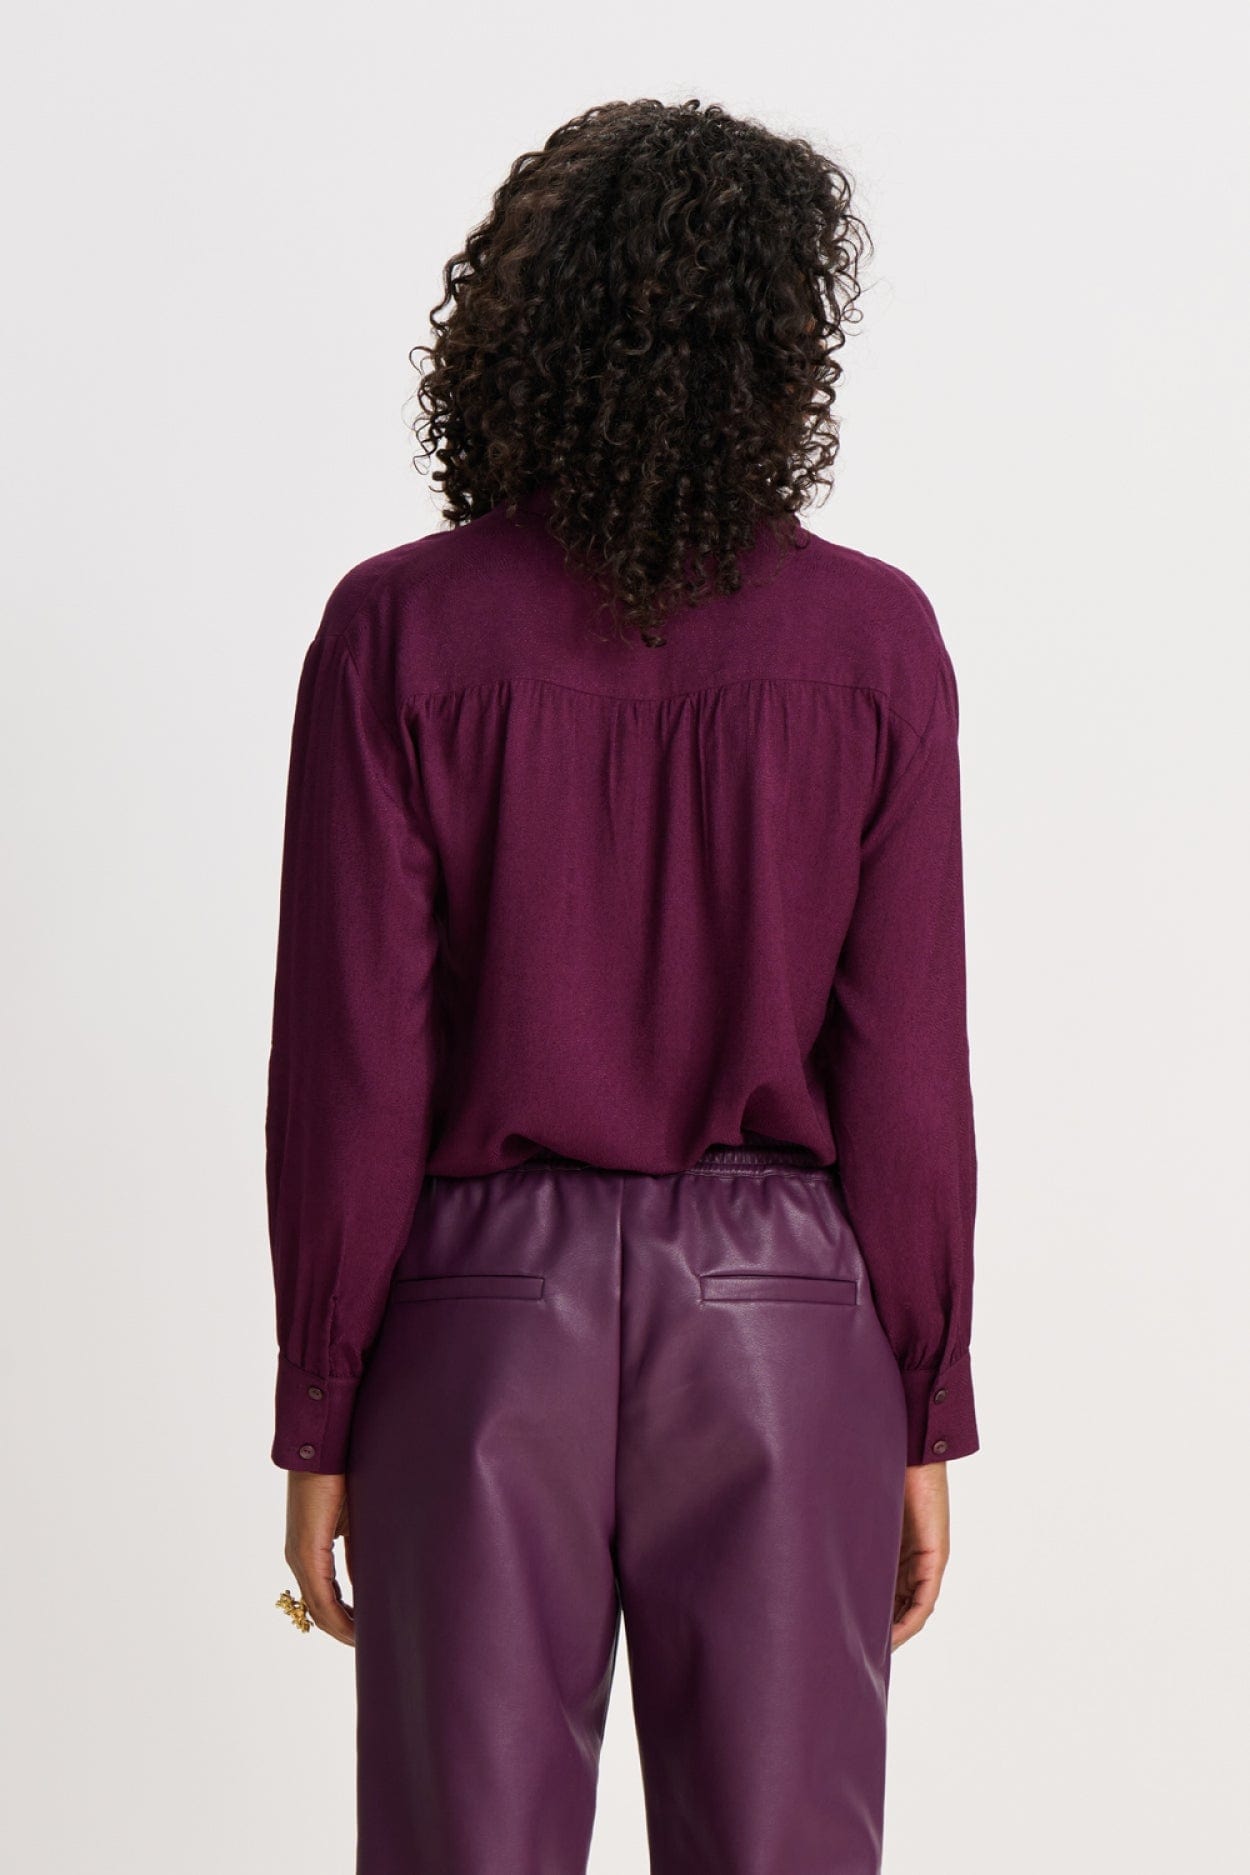 POM Amsterdam Blouses BLOUSE - Milly Winterbloom